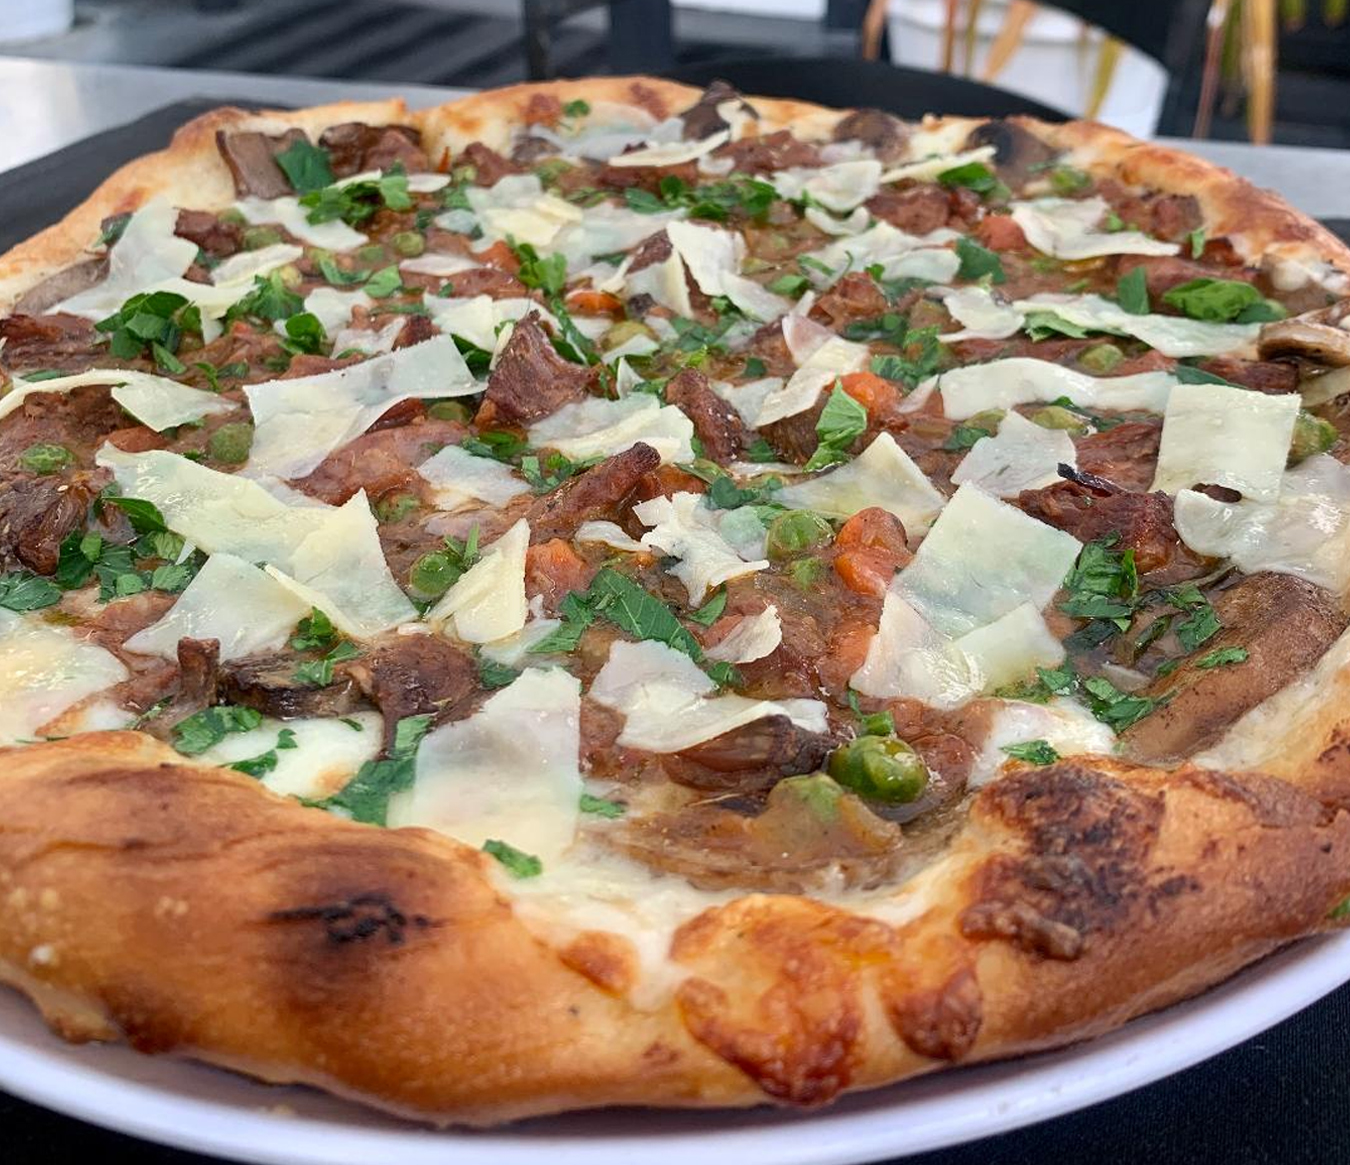 Where to Eat In Miami - Crust